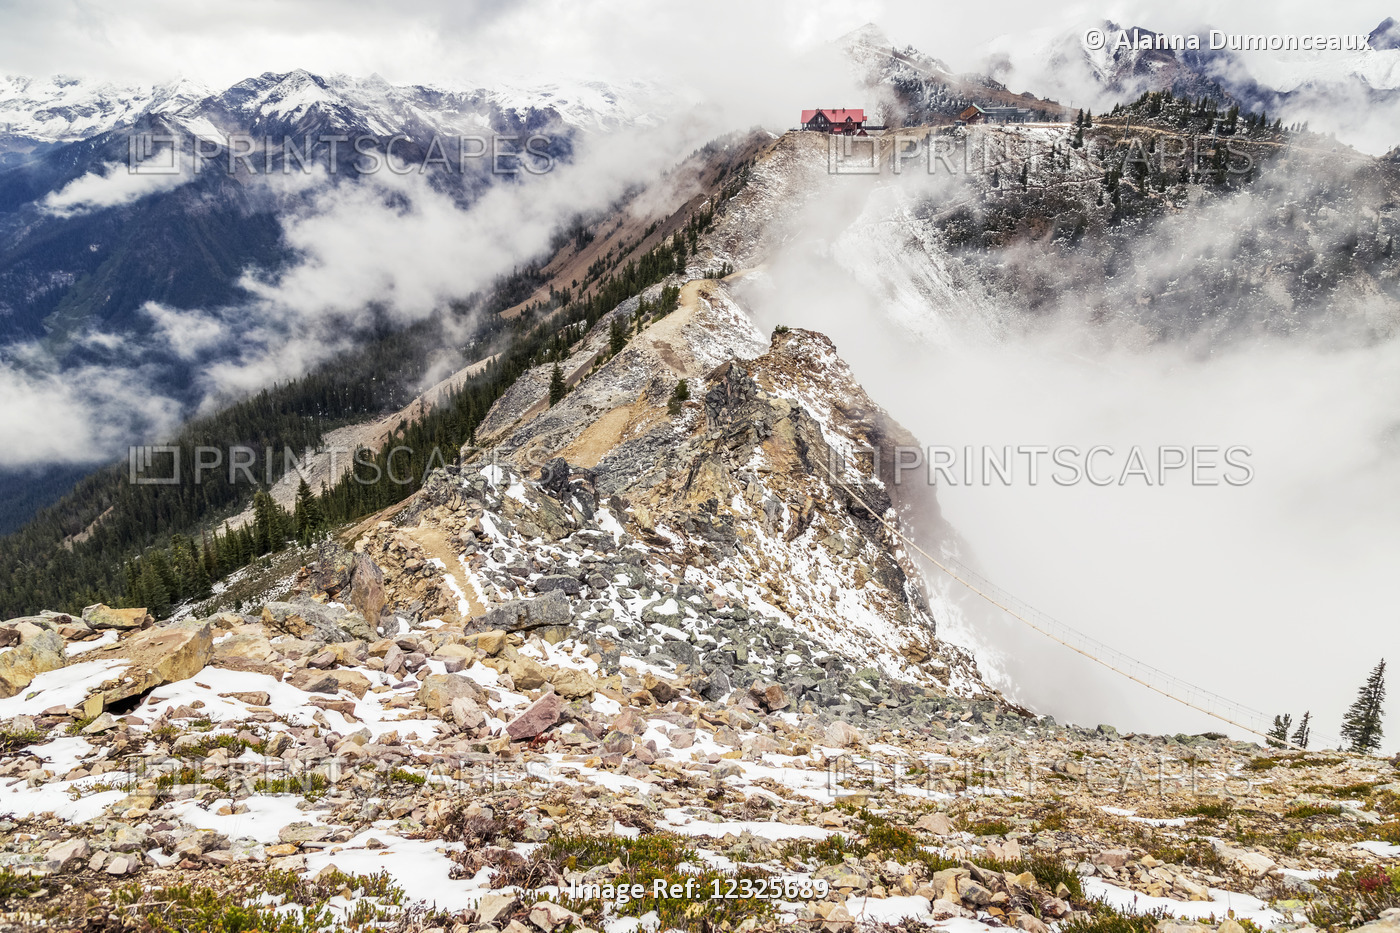 At The Summit Of The Hiking Trail On Kicking Horse Mountain, The Gondola And ...